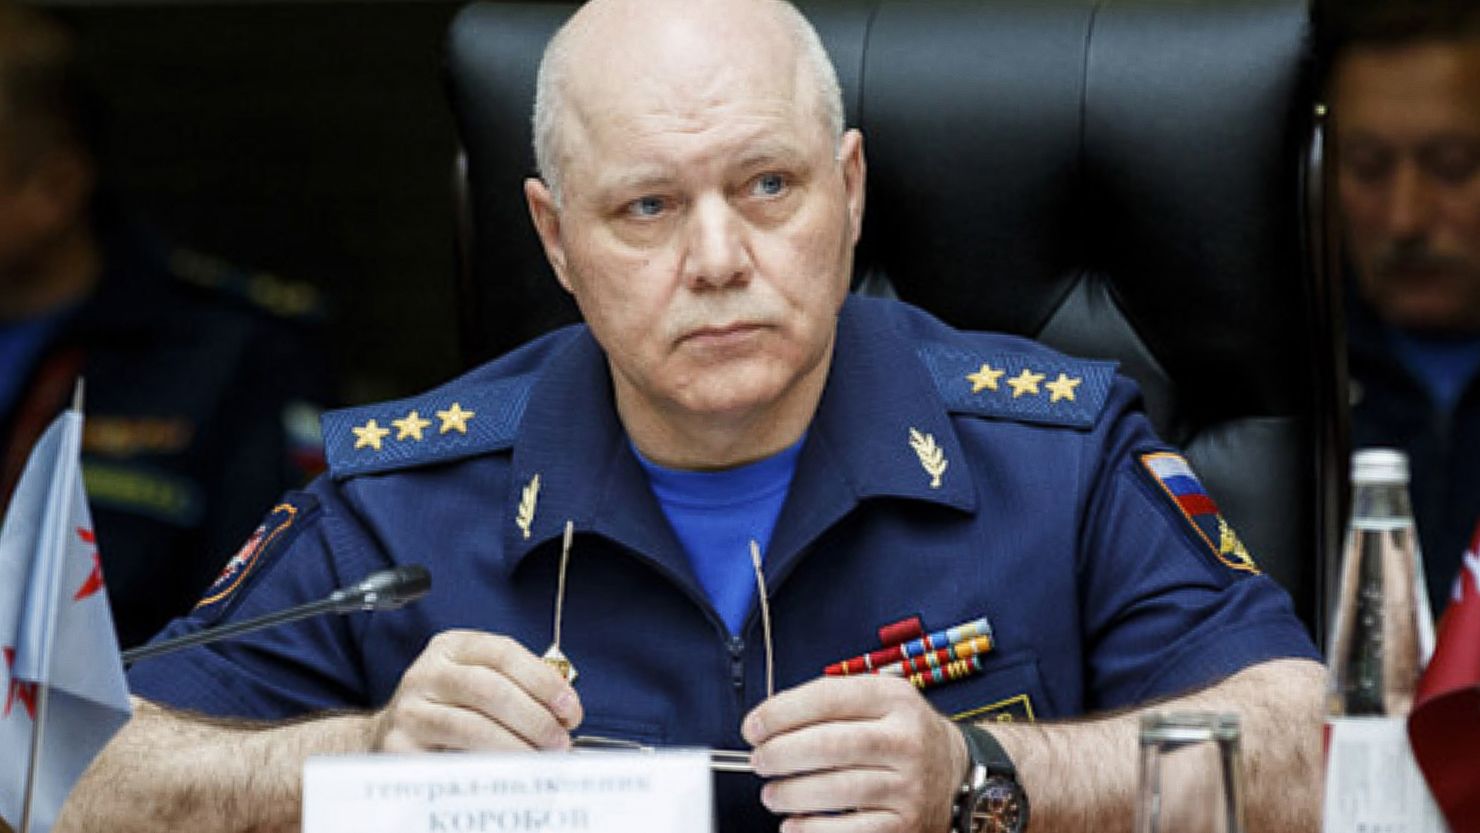 Igor Korobov, the head of the Russian military intelligence agency GRU, speaks during a news conference in Auhust 2017.